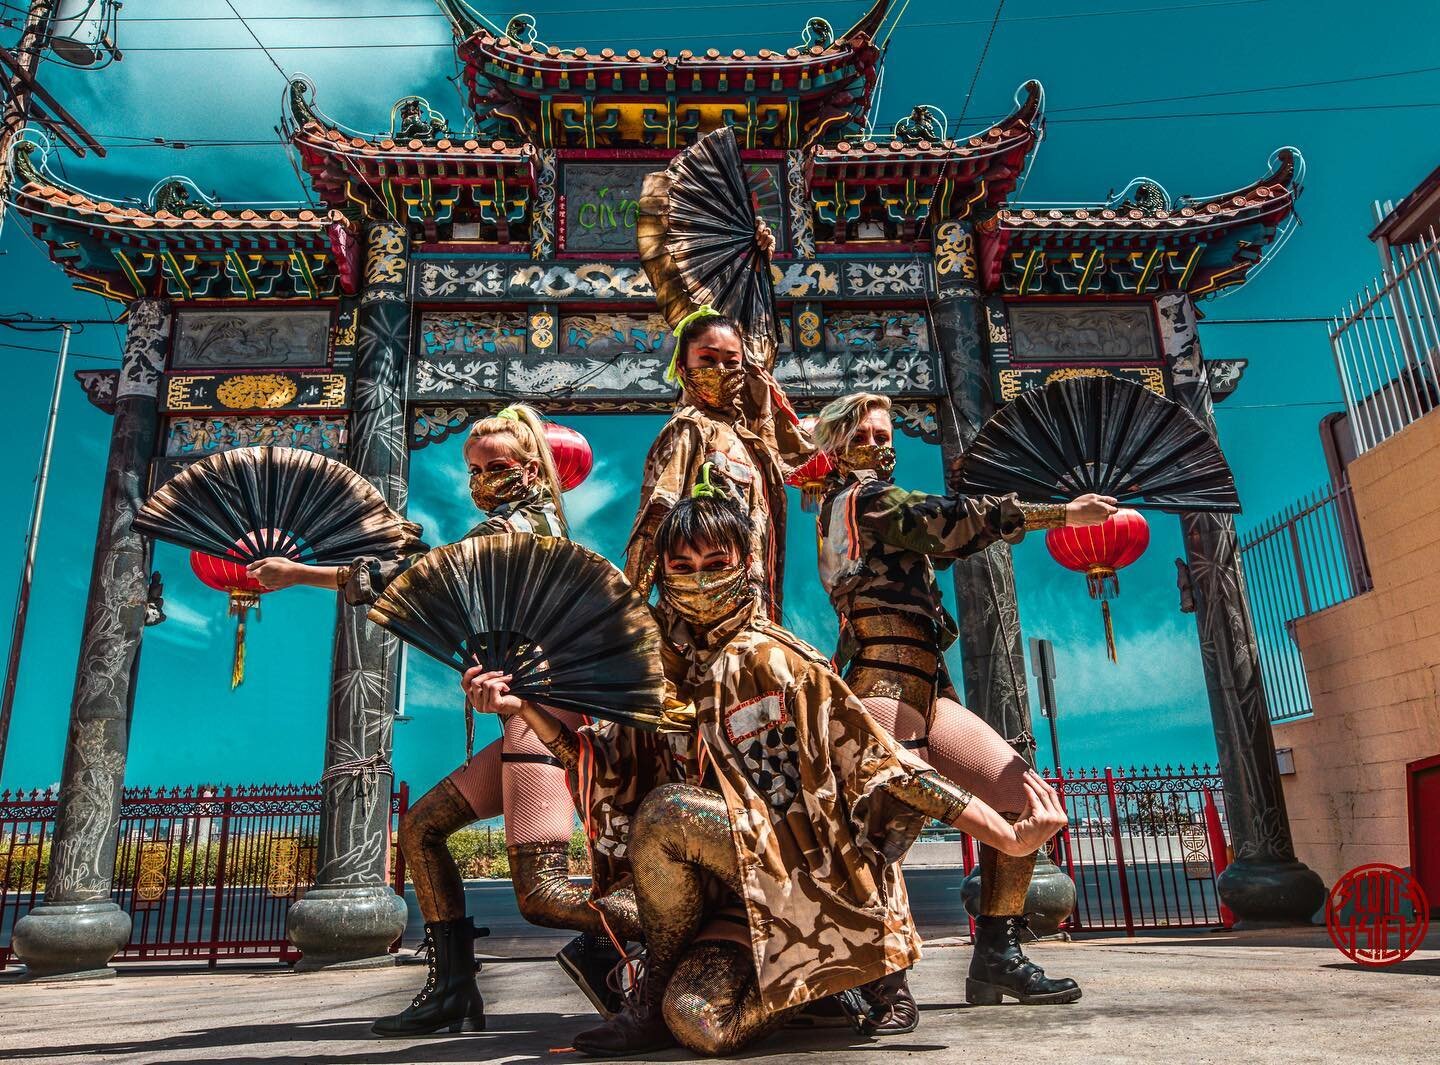 🎆This is How you want to roll up to the NewYears Eve Celebrations🎆
.
. **DOUBLE TAP** if youre ready to kick start your #NYE with your #SQUADGOALS .
.
📸: @syhphotography @scotty.hsieh
🎎wardrobe : @seadragonstudio #SDglamfam .
.
.
.
#photography #